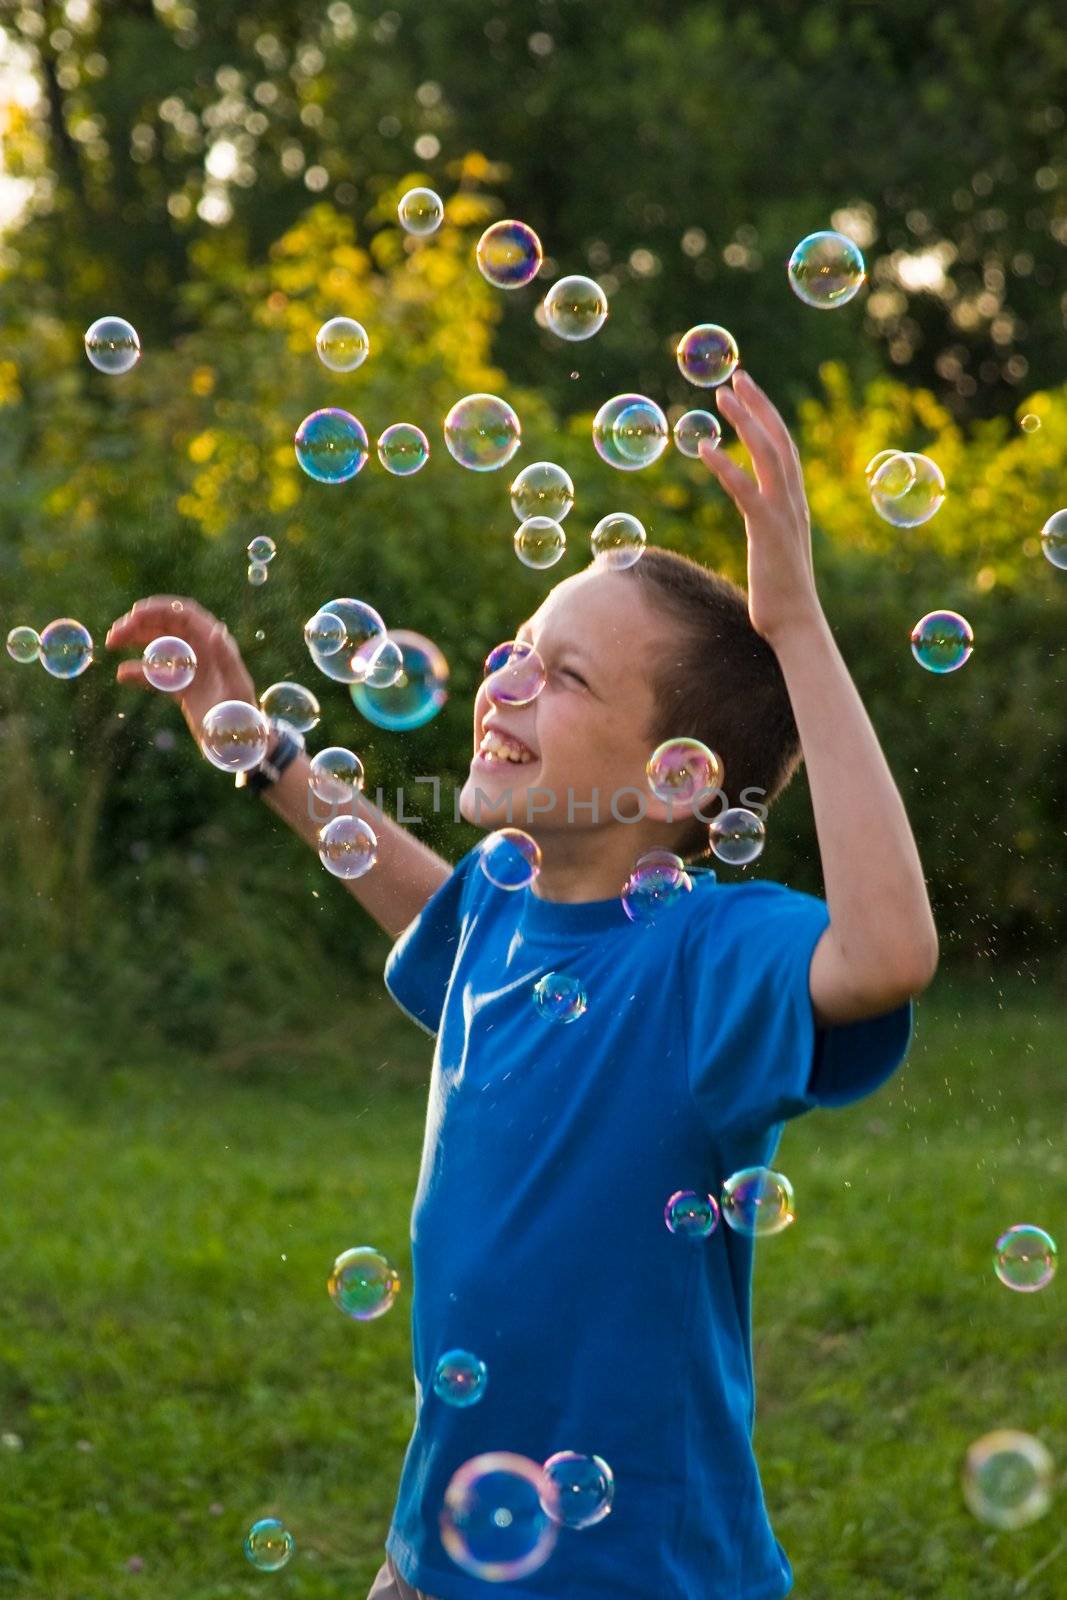 children series: boy play with soap bubbles, childhood